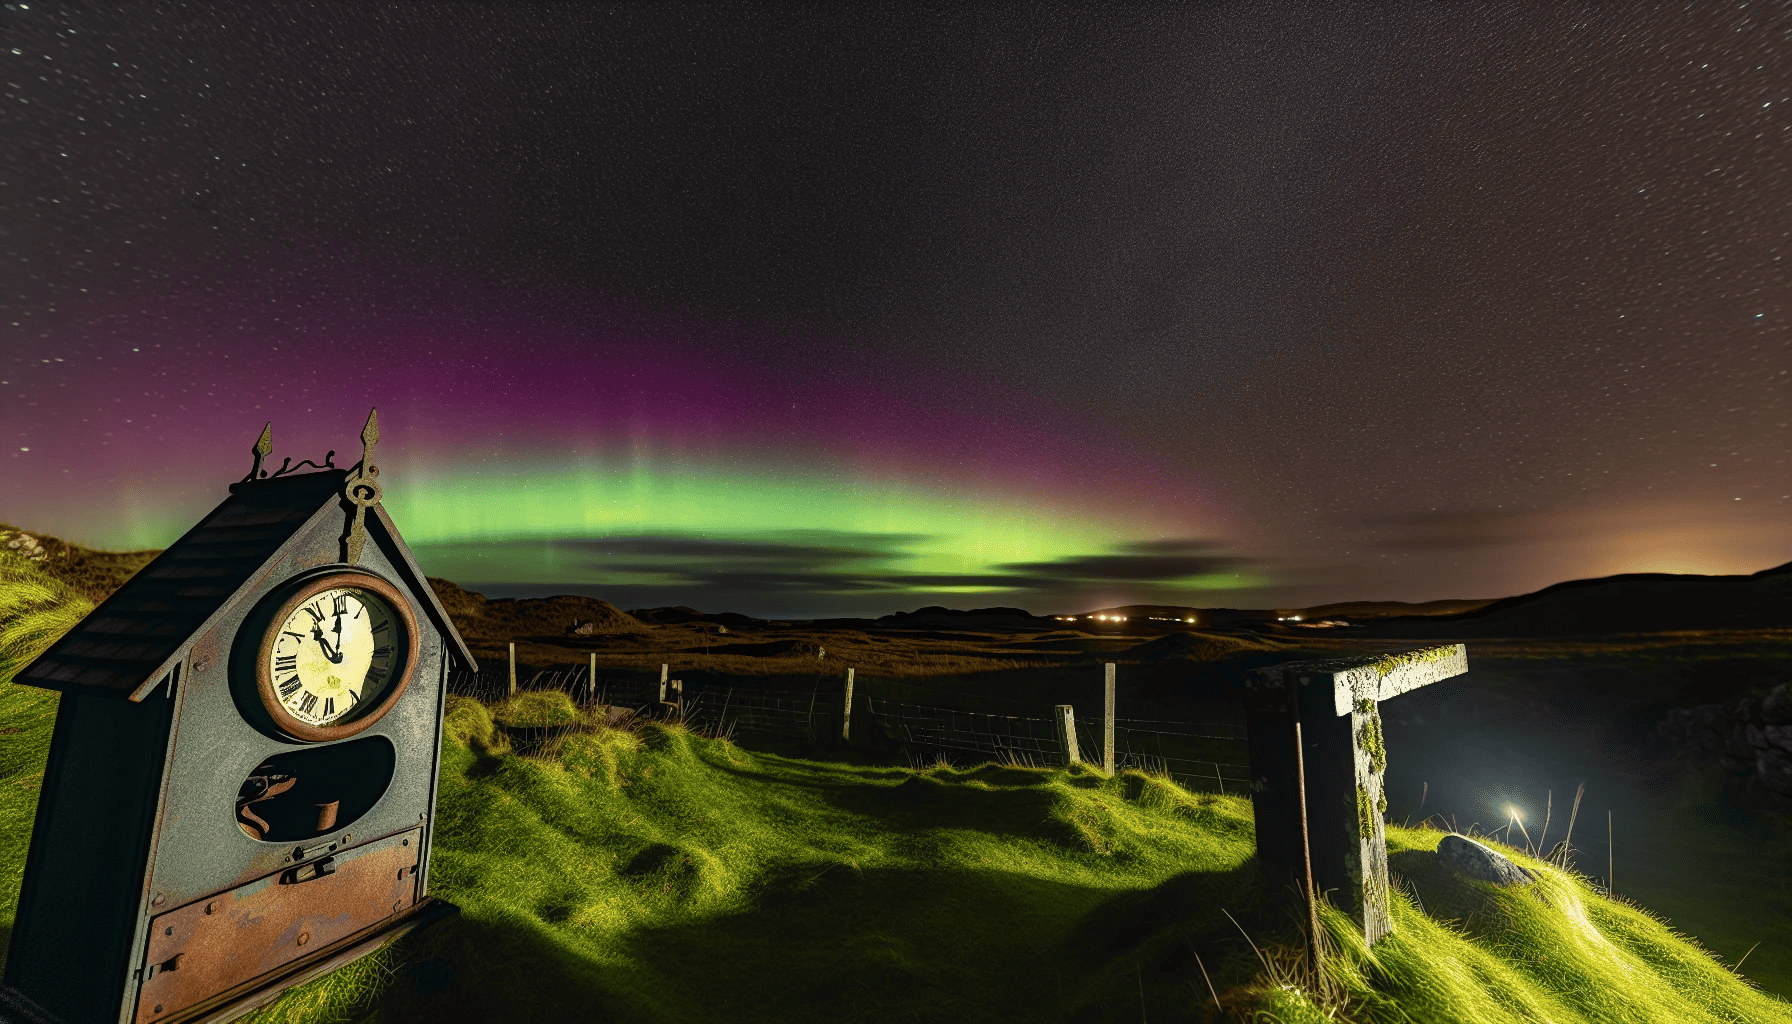 Optimal time for chasing the Northern Lights in Northern Ireland - midnight under clear skies